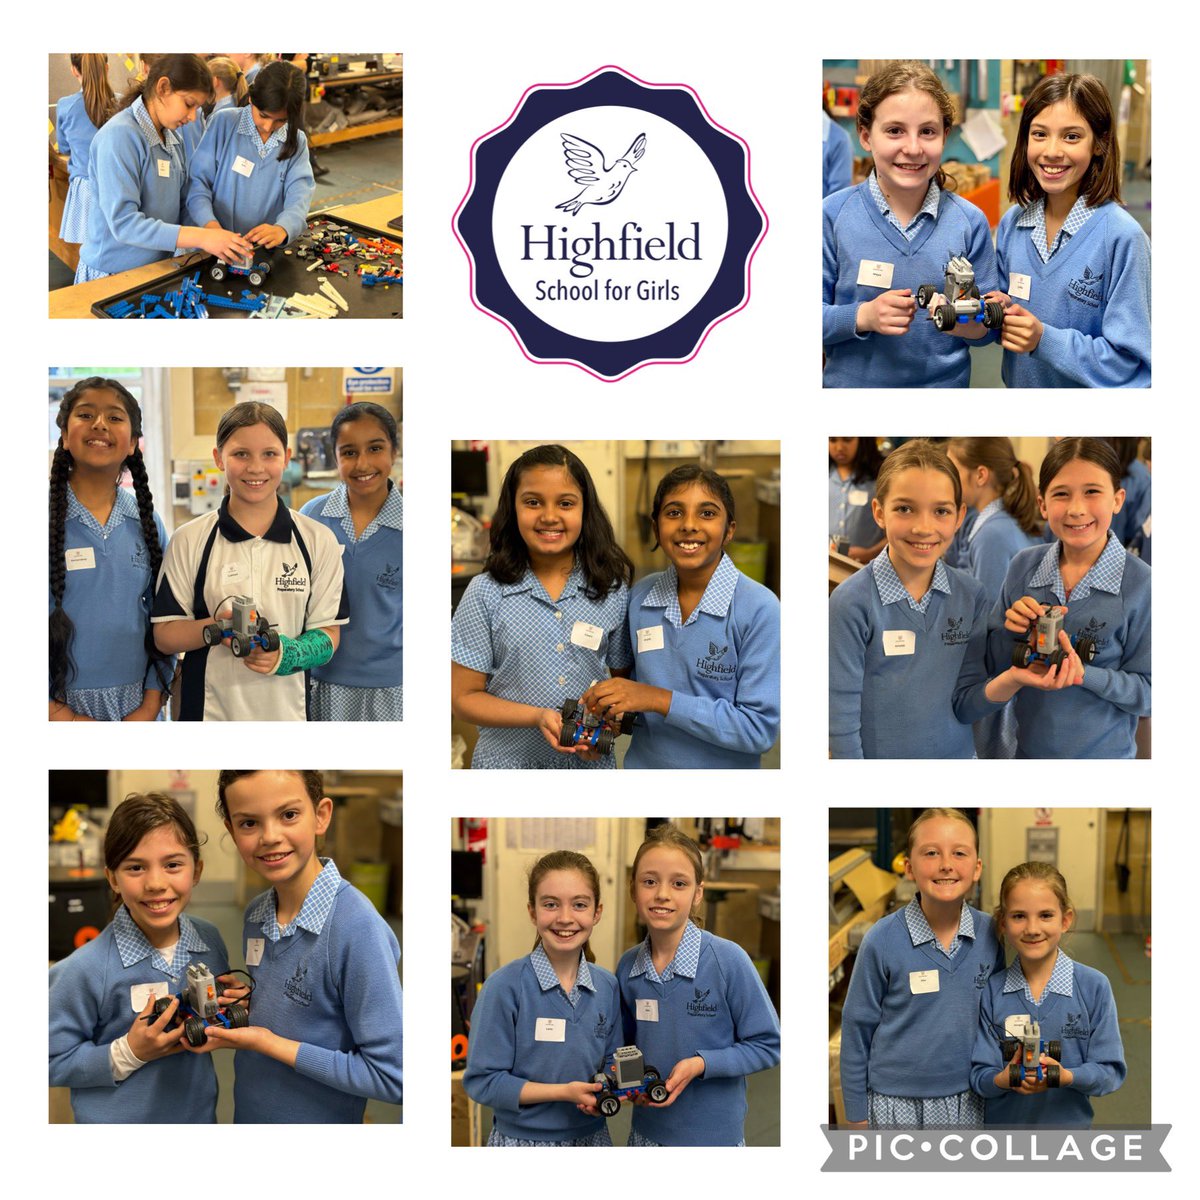 Year 5 were extremely lucky to be invited to @LPSchool for a DT & Engineering workshop with our favourite: LEGO! Reinforcing our learning of the engineering design process, teamwork and determination. Great work, girls! @chatsworthschls #engineers #girlsinstem